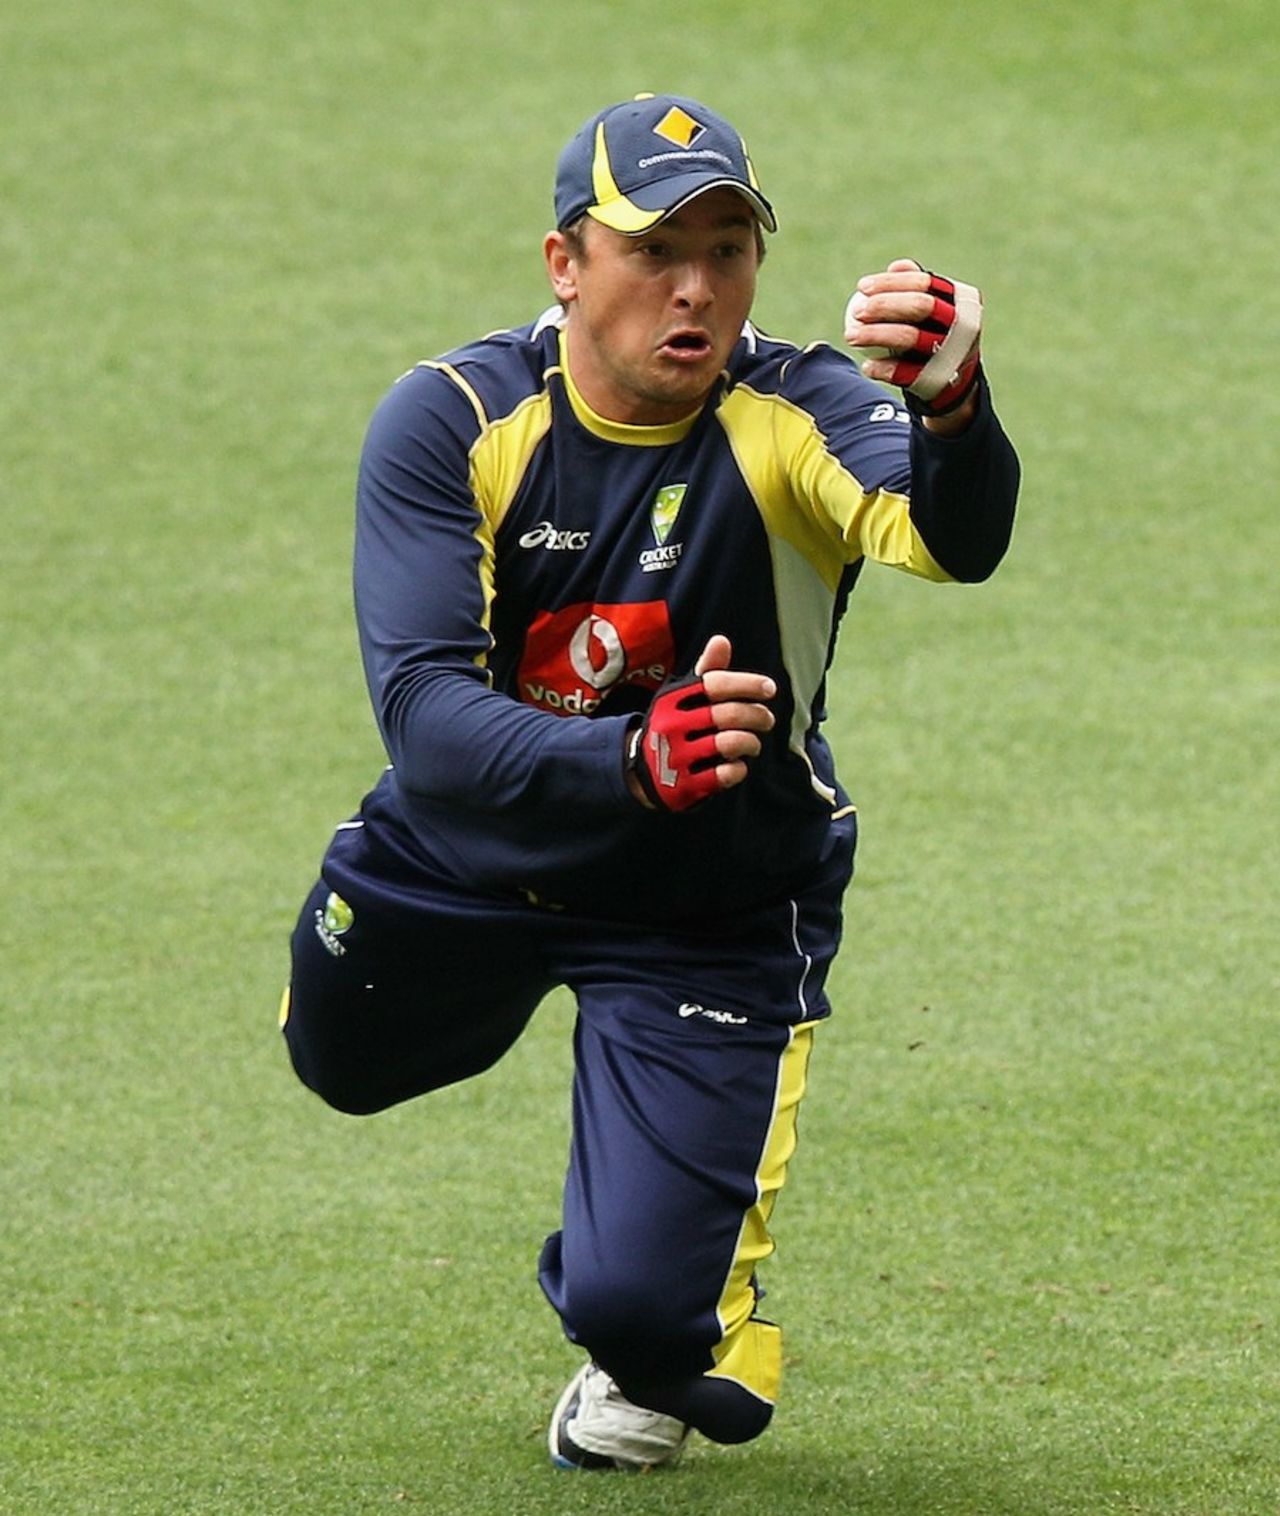 Peter Forrest during catching practice, Melbourne, March 1, 2012